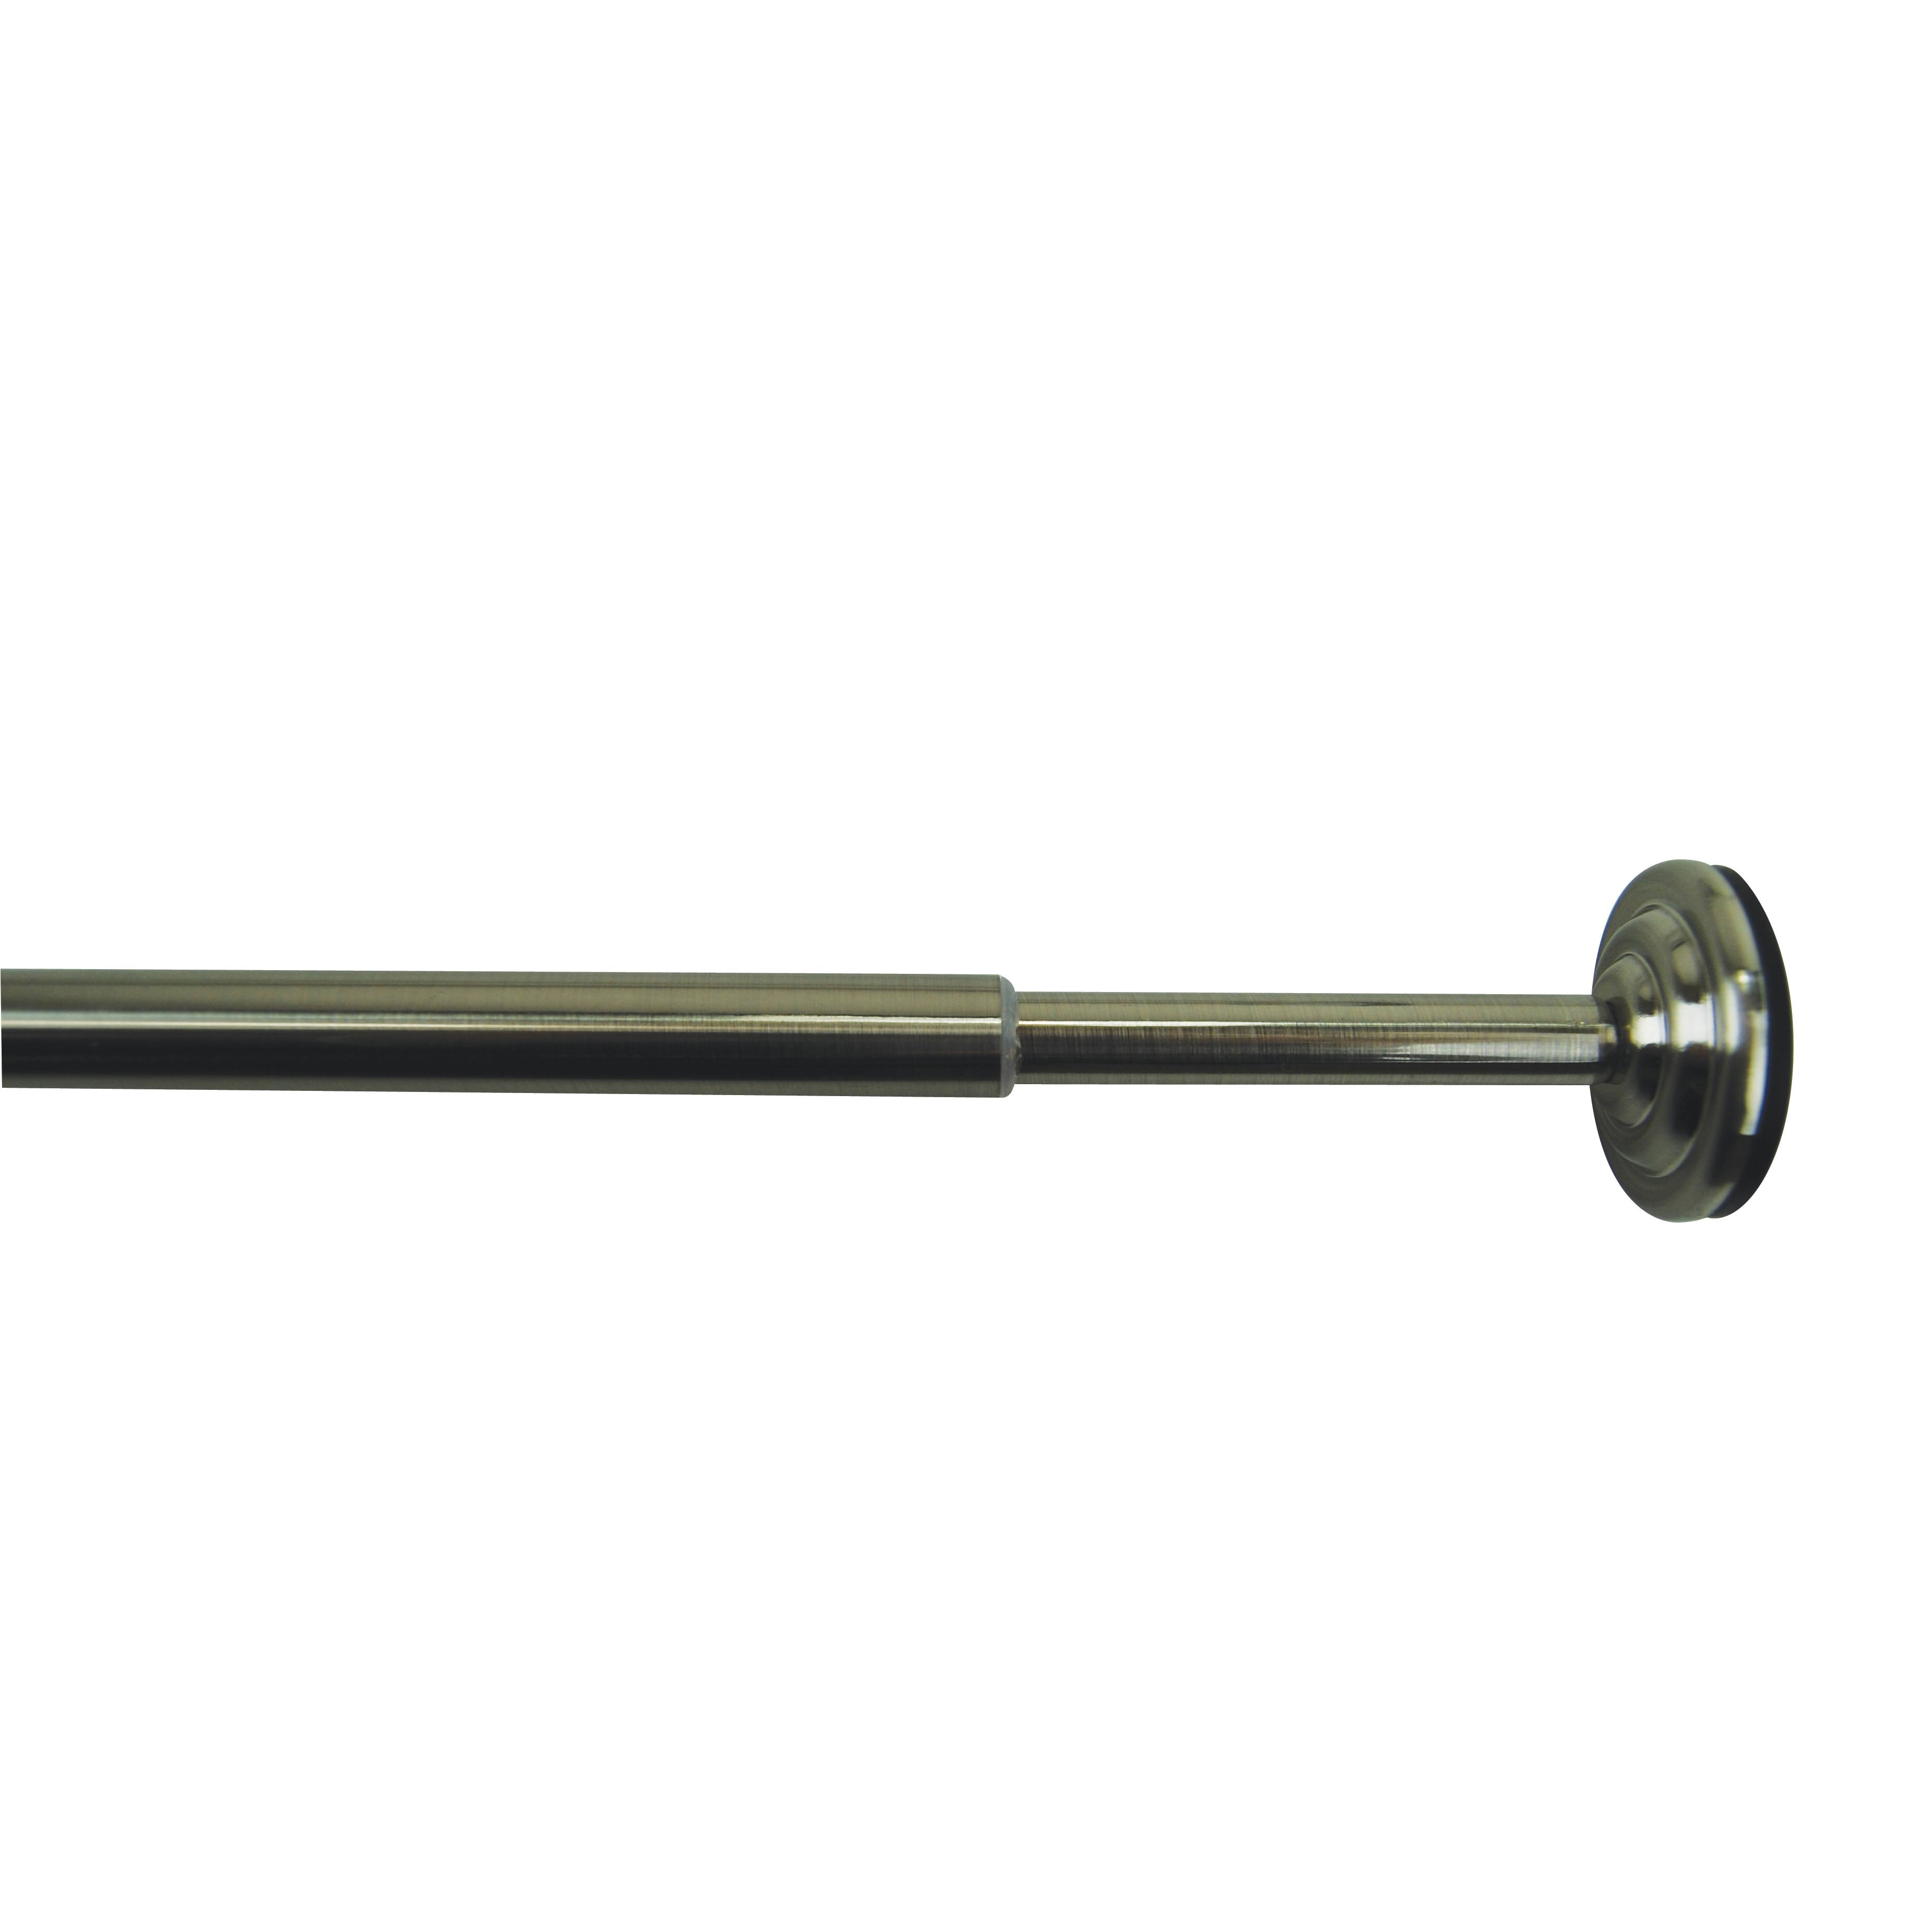 Versailles Home Fashions MTR3654-903 0.5 In. Tension Rod 36-54 In. - Brushed Nickel